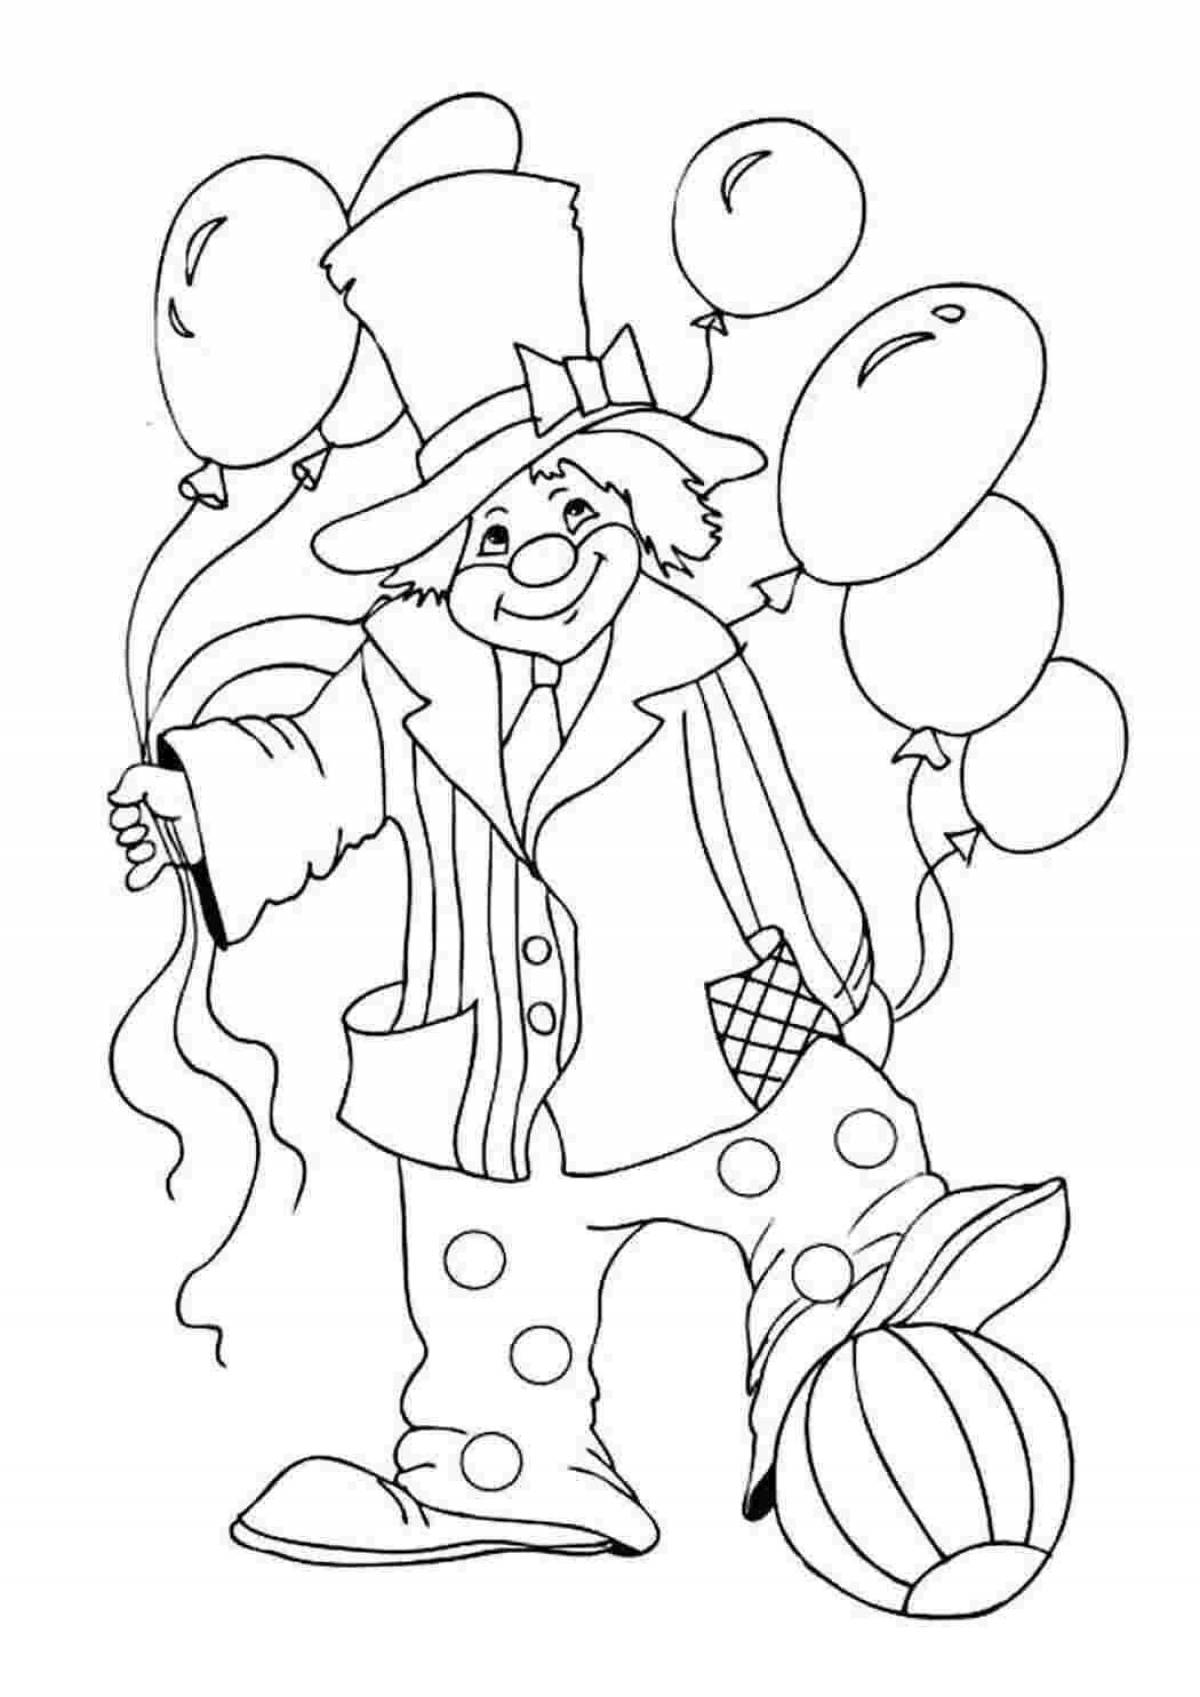 Bubble clown with balloons